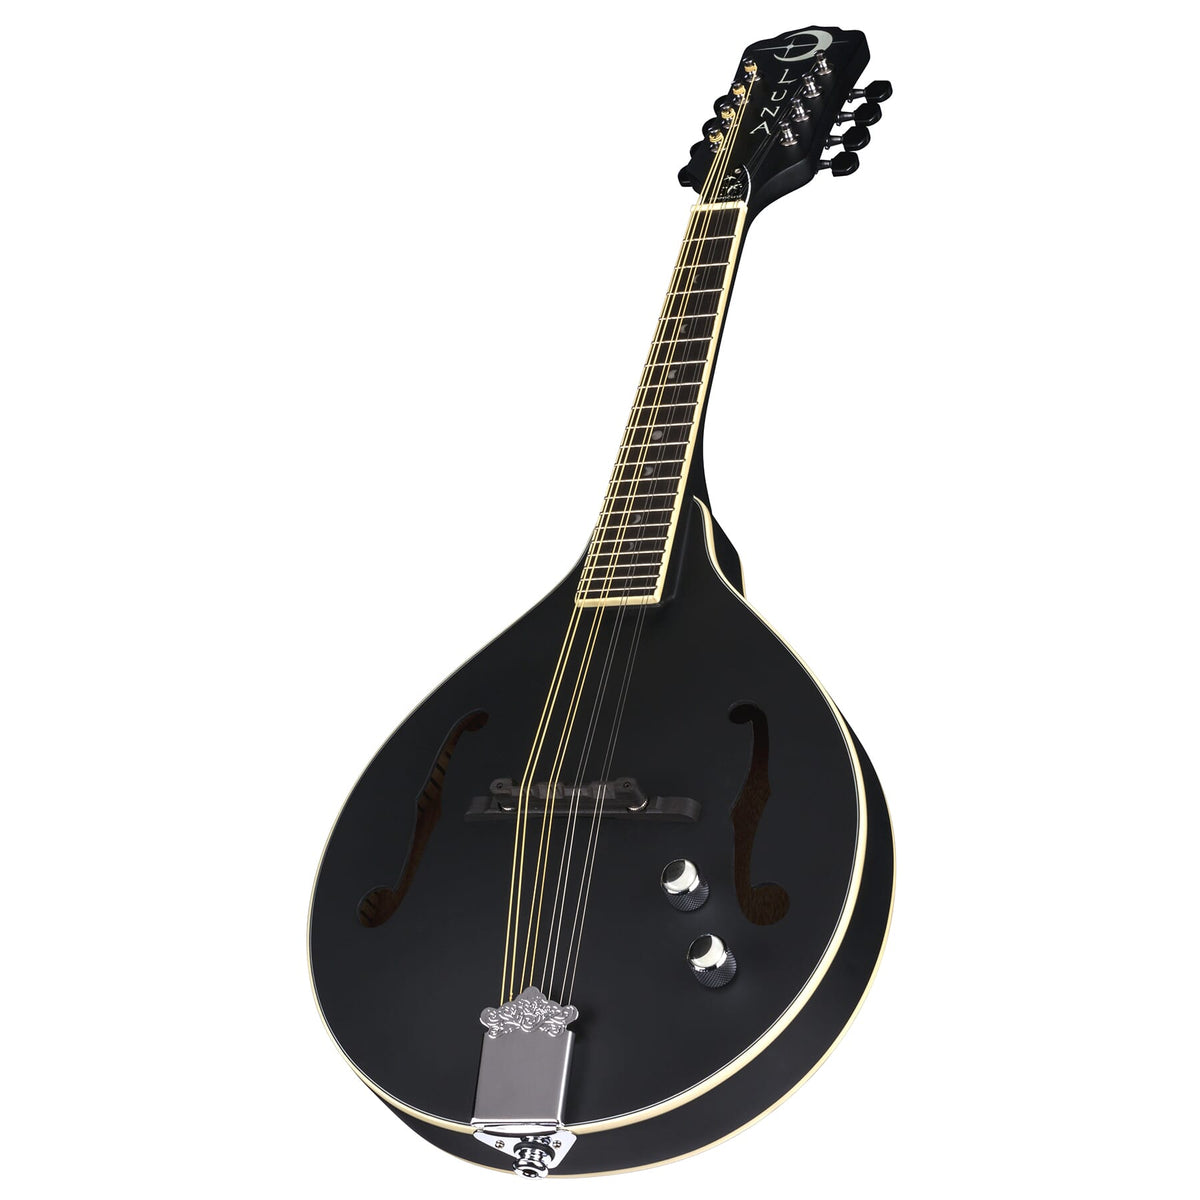 House　Moonbird　Musical　A-style　of　Acoustic-Electric　–　Mandolin　Luna　Traditions